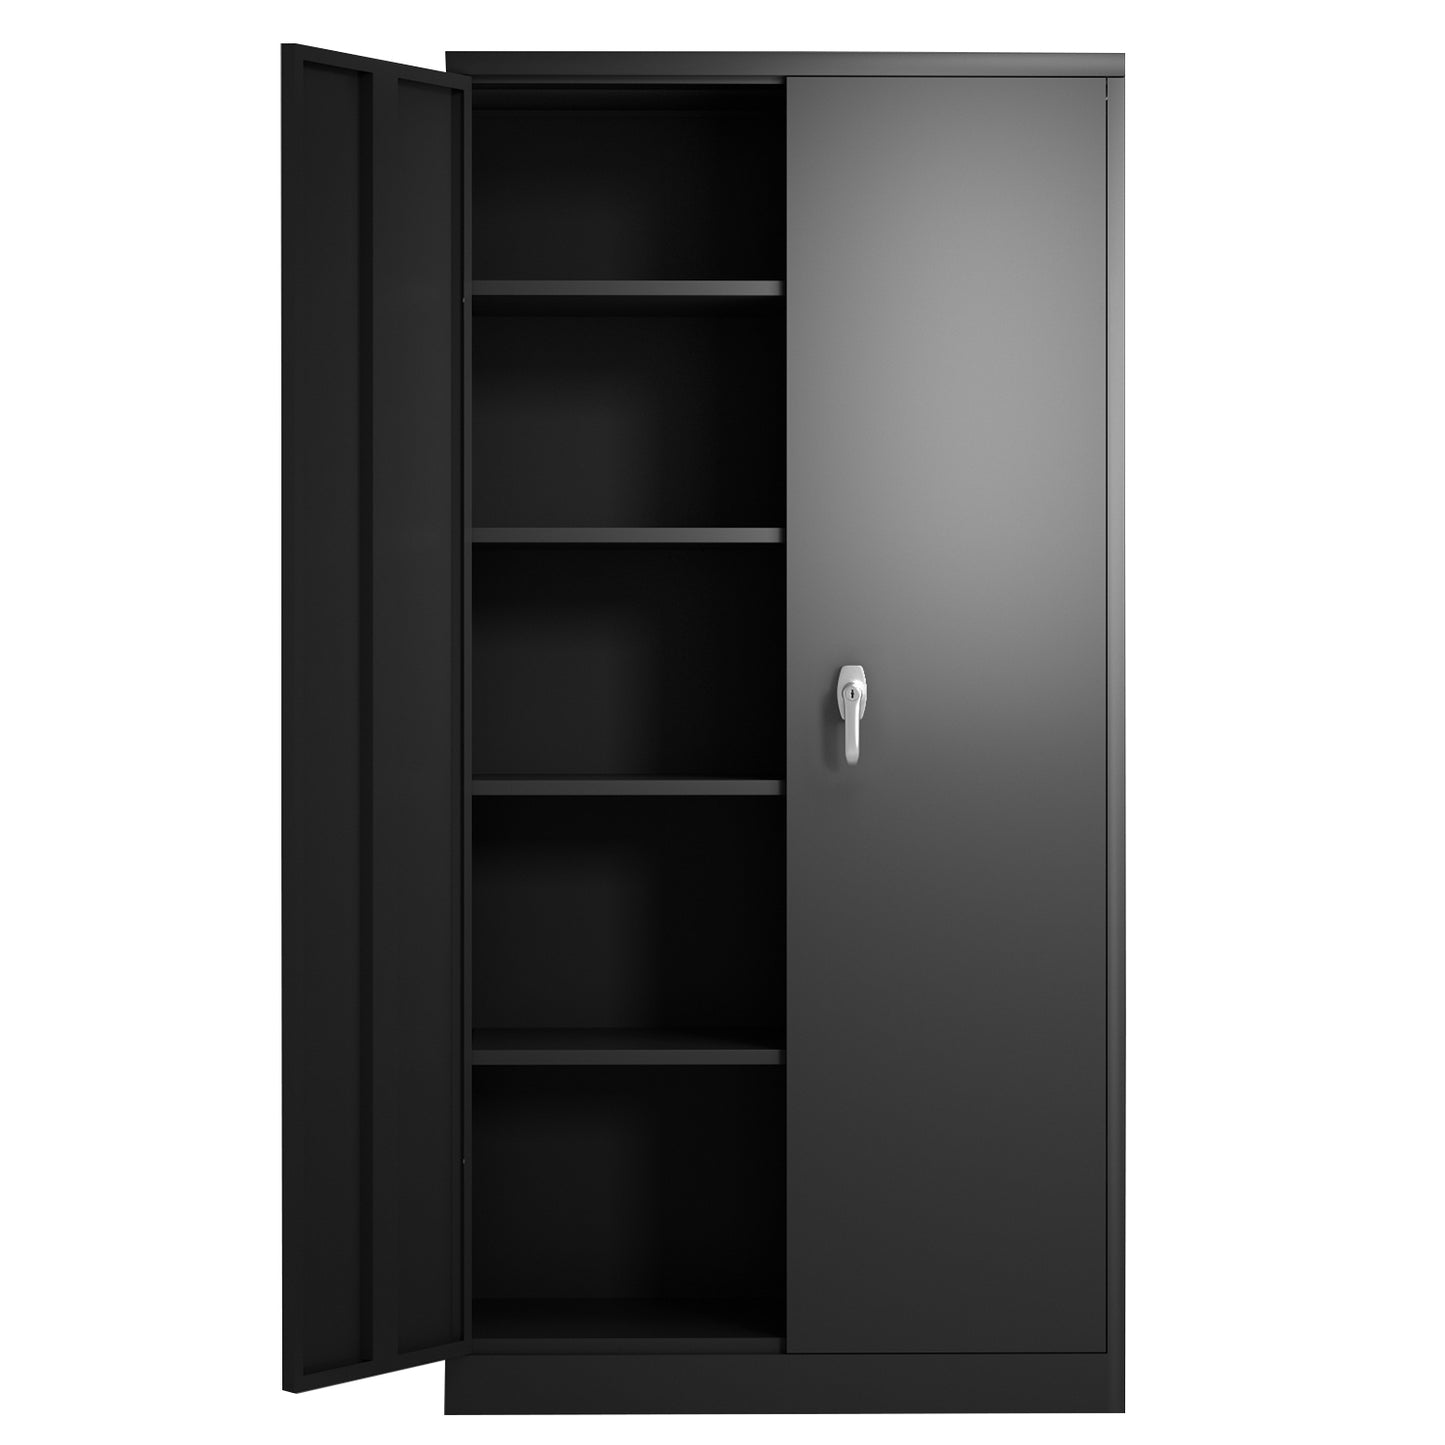 Metal Storage Cabinet,Steel Storage Cabinet with 2 Doors and 4 Adjustable Shelves,Black Metal Cabinet with Lock,72"Tall Steel Utility Cabinets for Storage Office,Garage,Home, Classroom, Shop